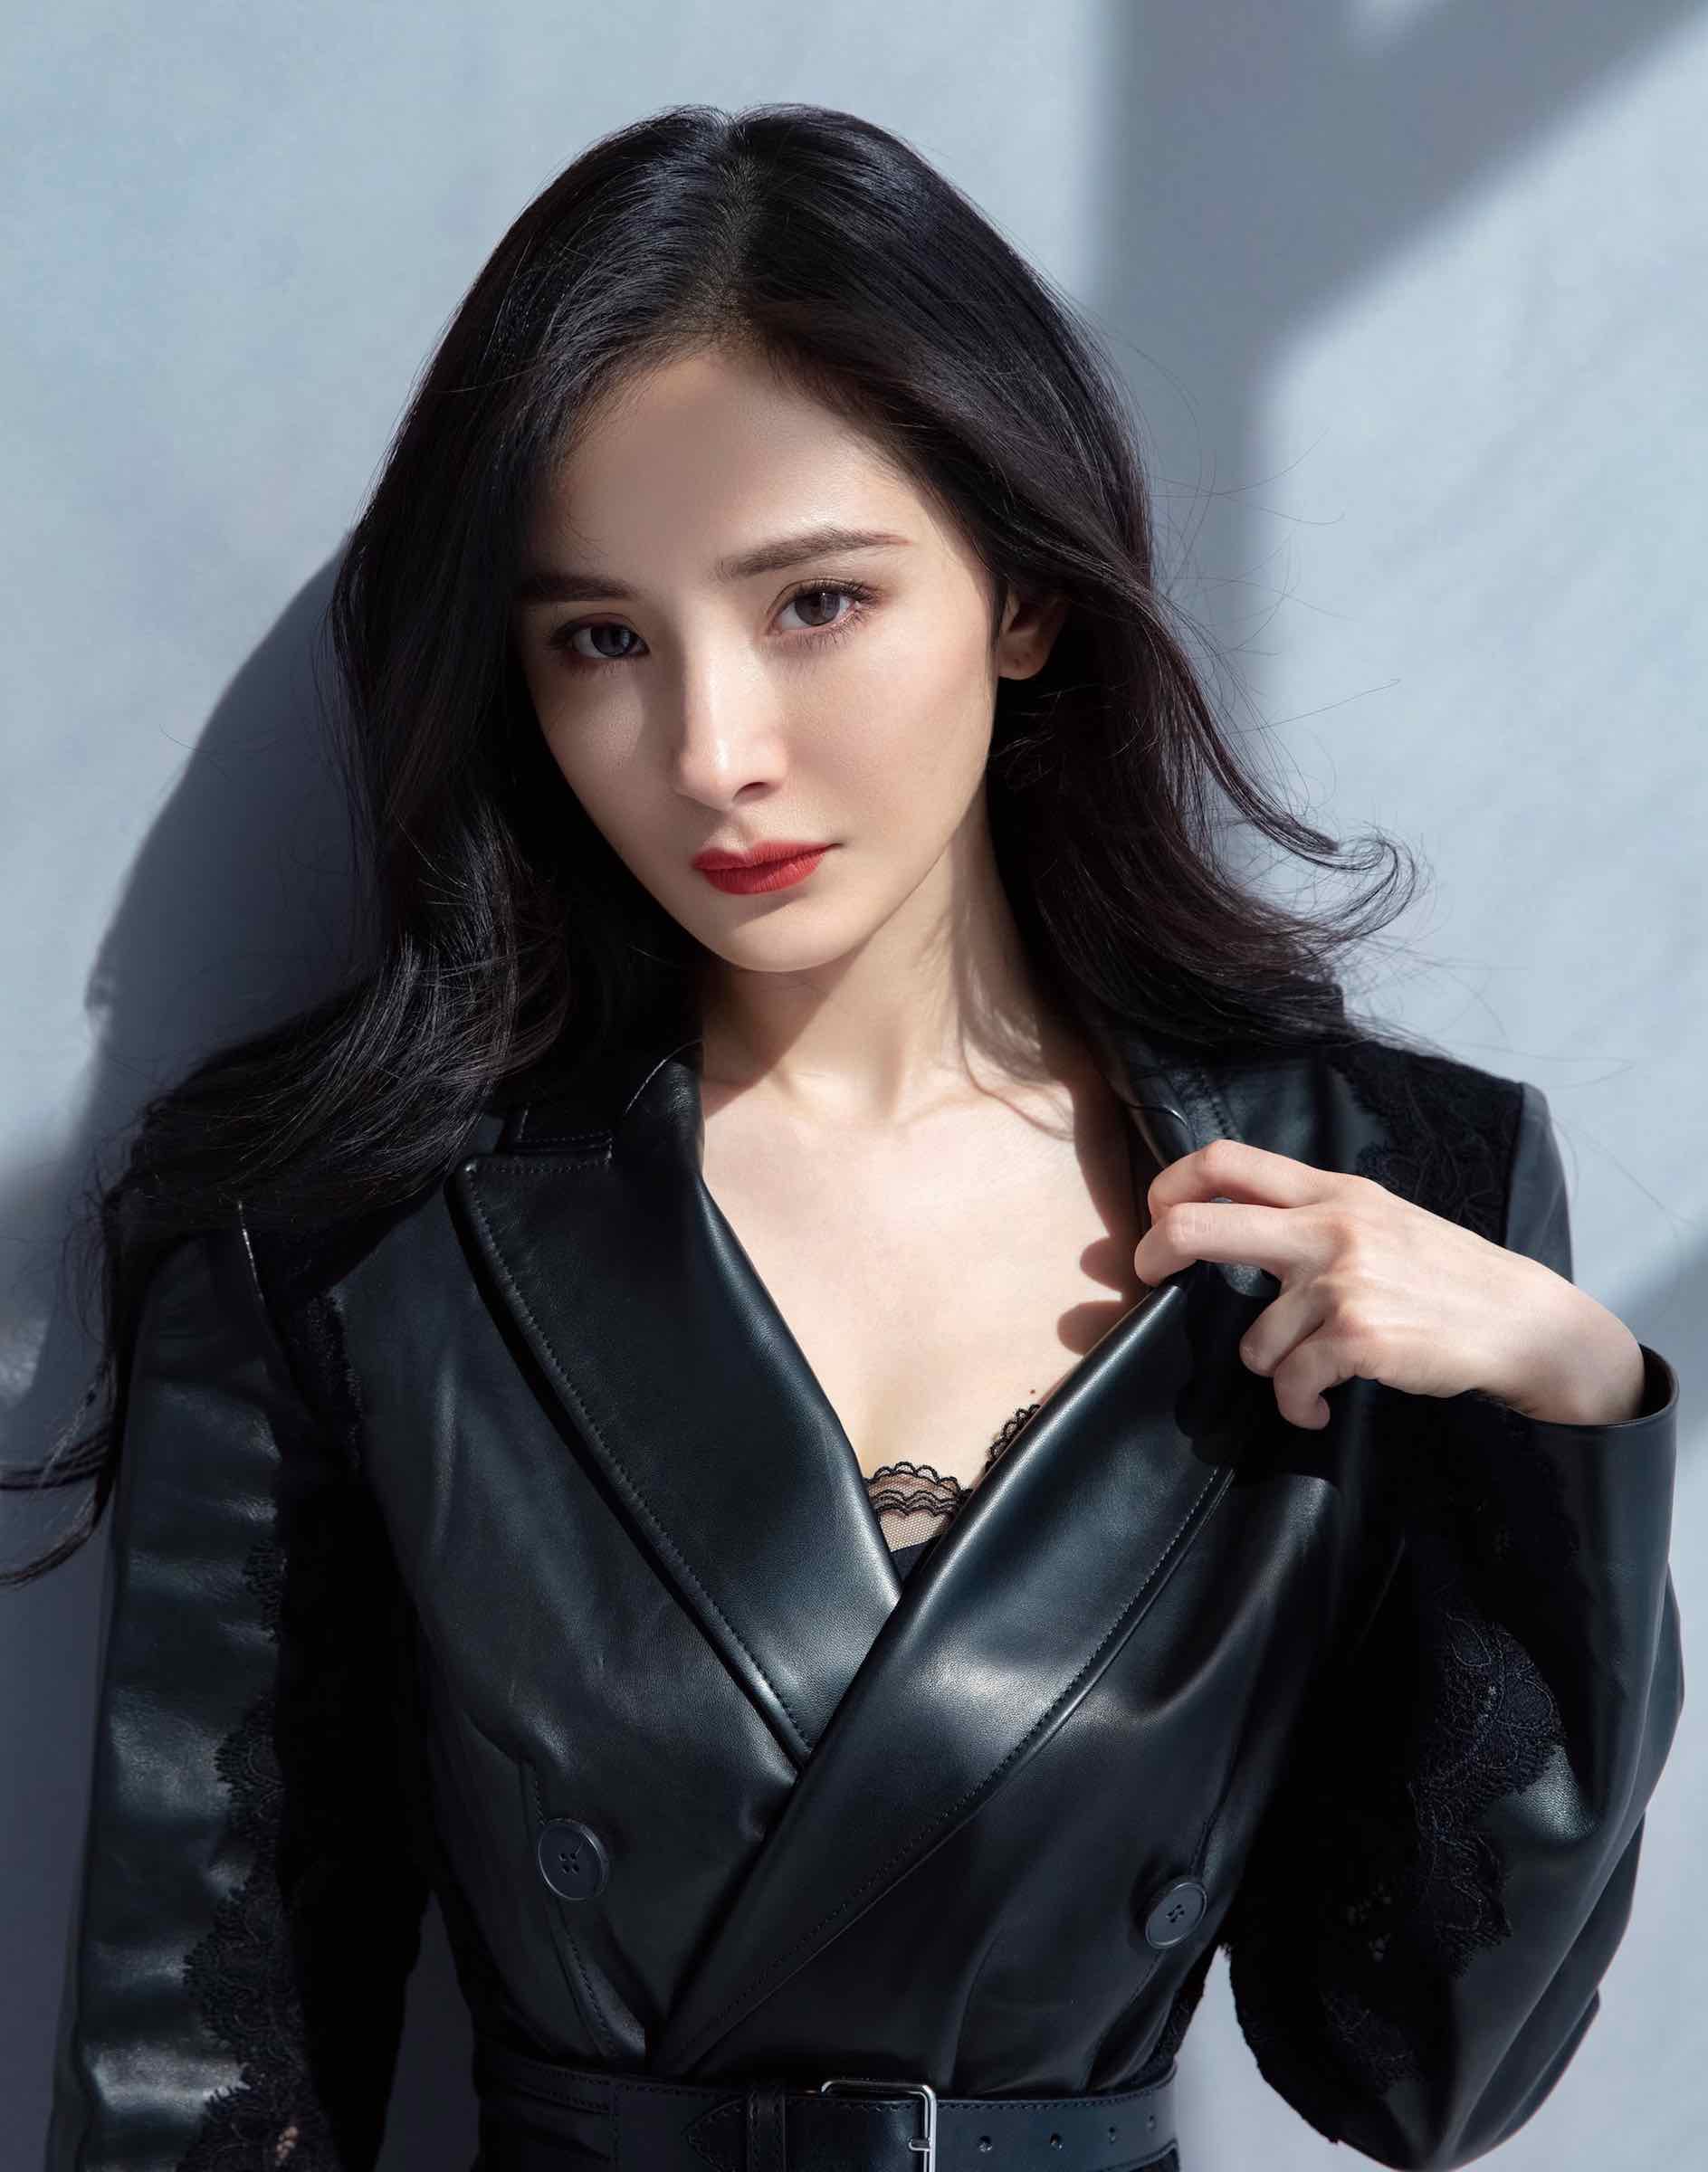 Curious about Yang Mi? Check out these quintessential projects